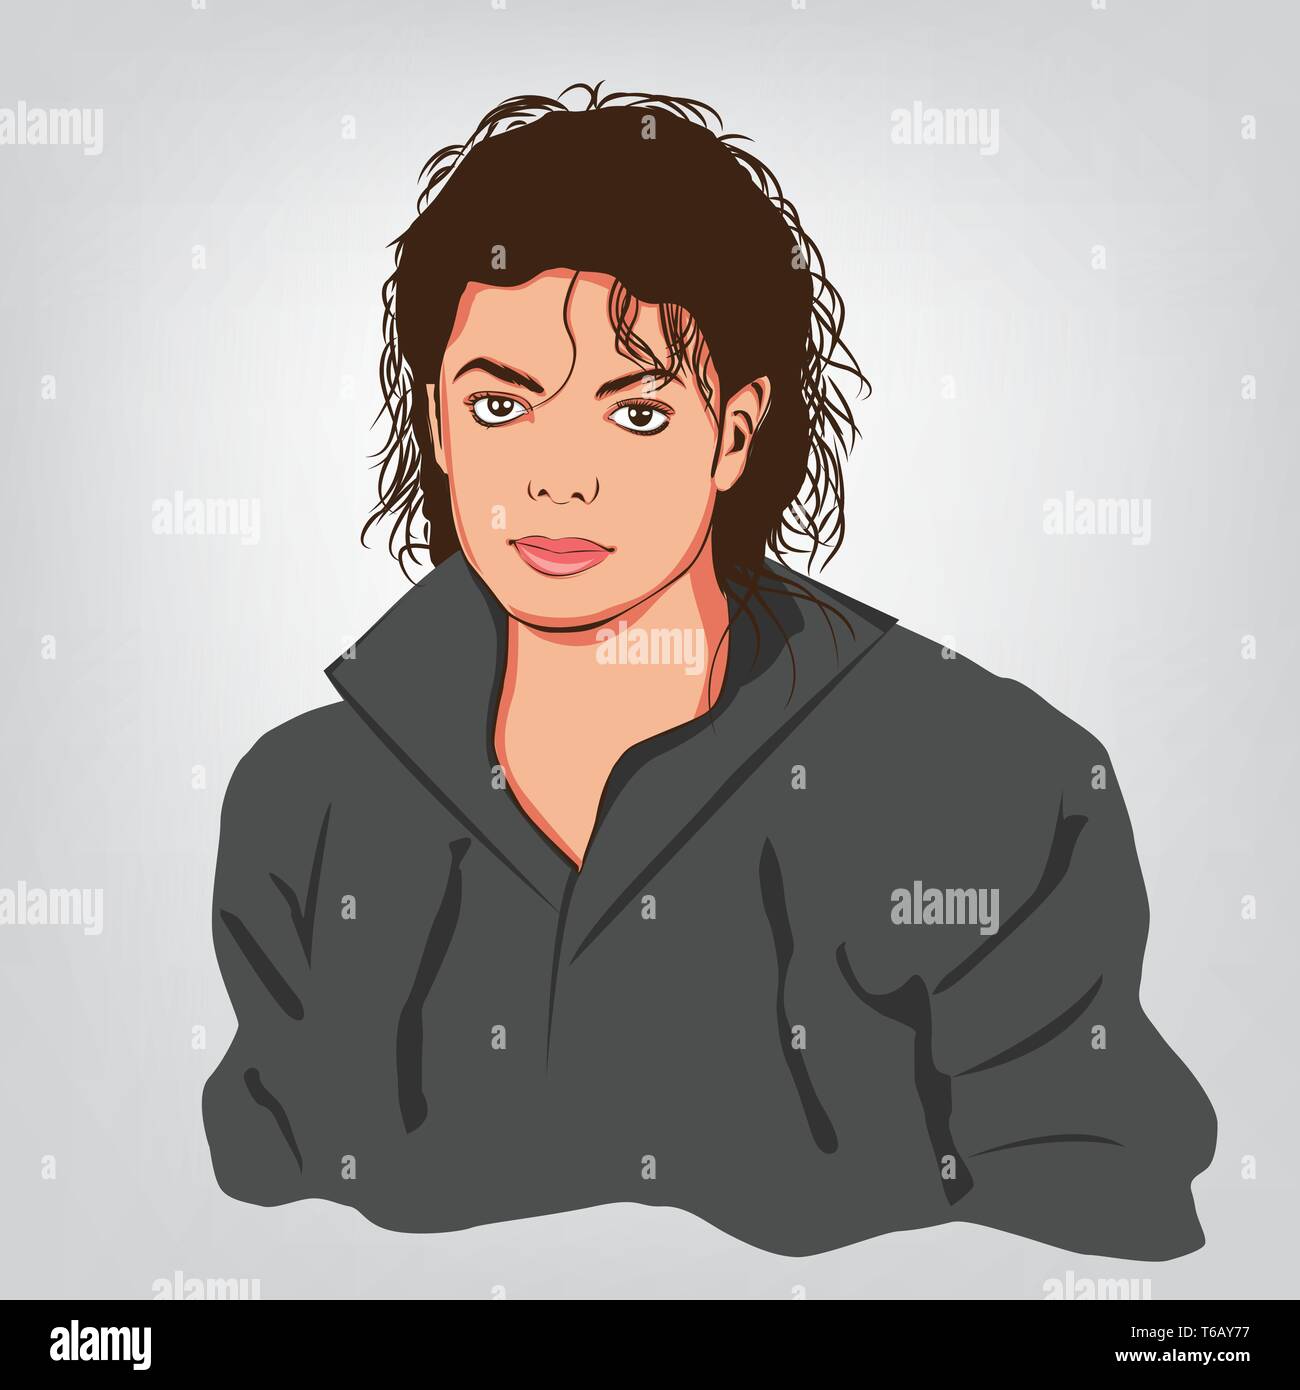 Michael Joseph Jackson (August 29, 1958 – June 25, 2009) was an American singer, songwriter and dancer. Dubbed the 'King of Pop', vector image. Stock Vector